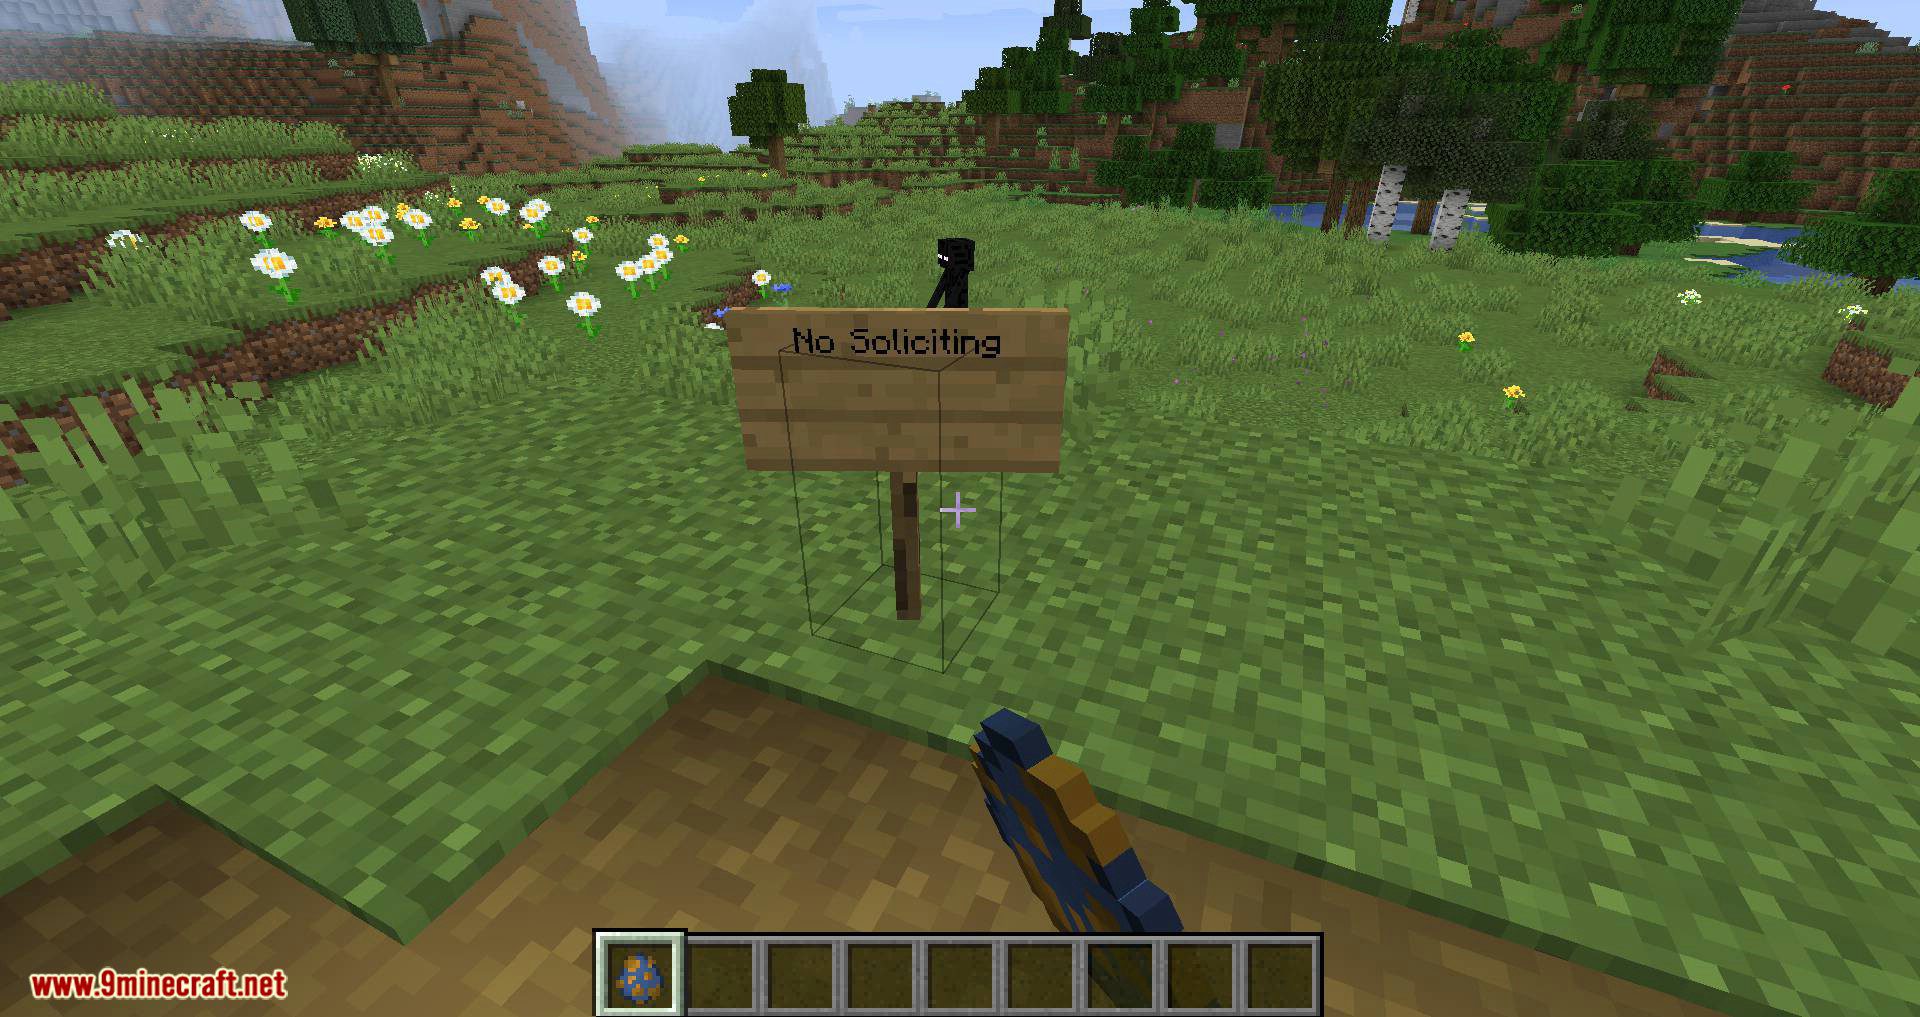 No Soliciting mod for minecraft 10